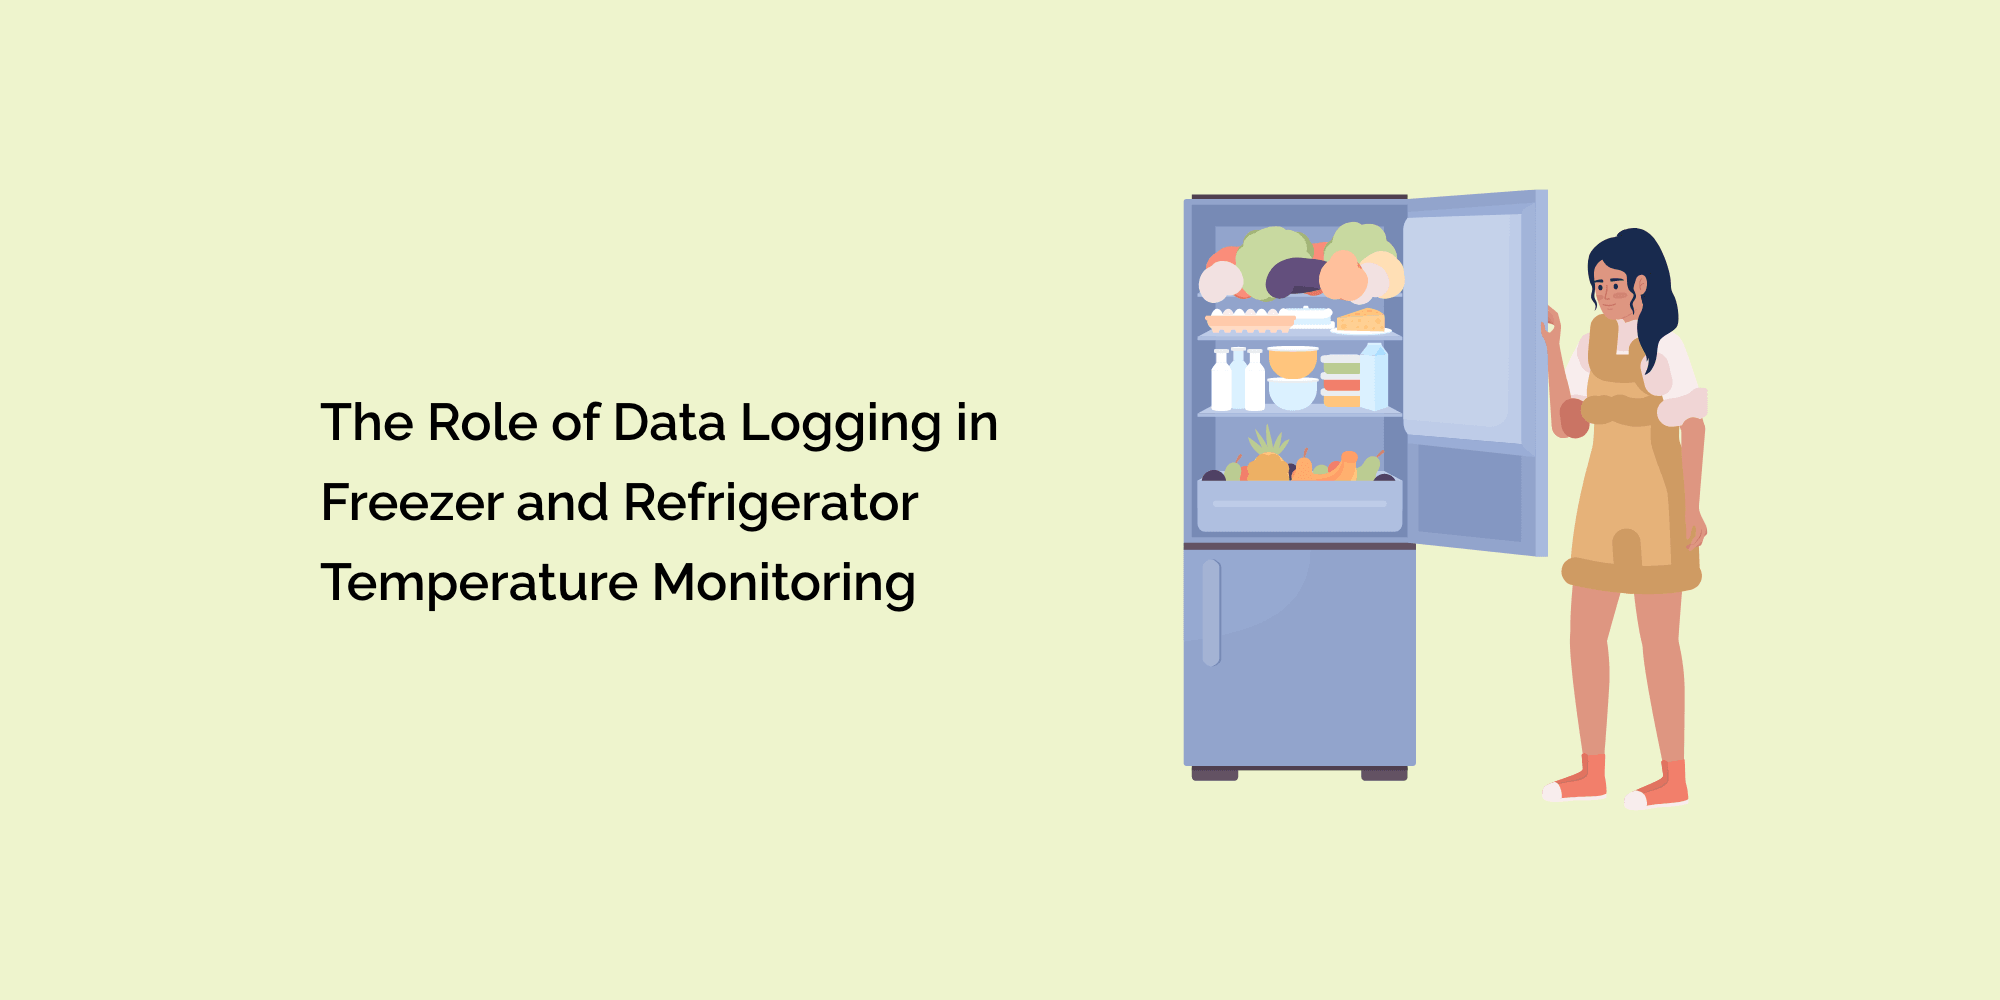 The Role of Data Logging in Freezer and Refrigerator Temperature Monitoring